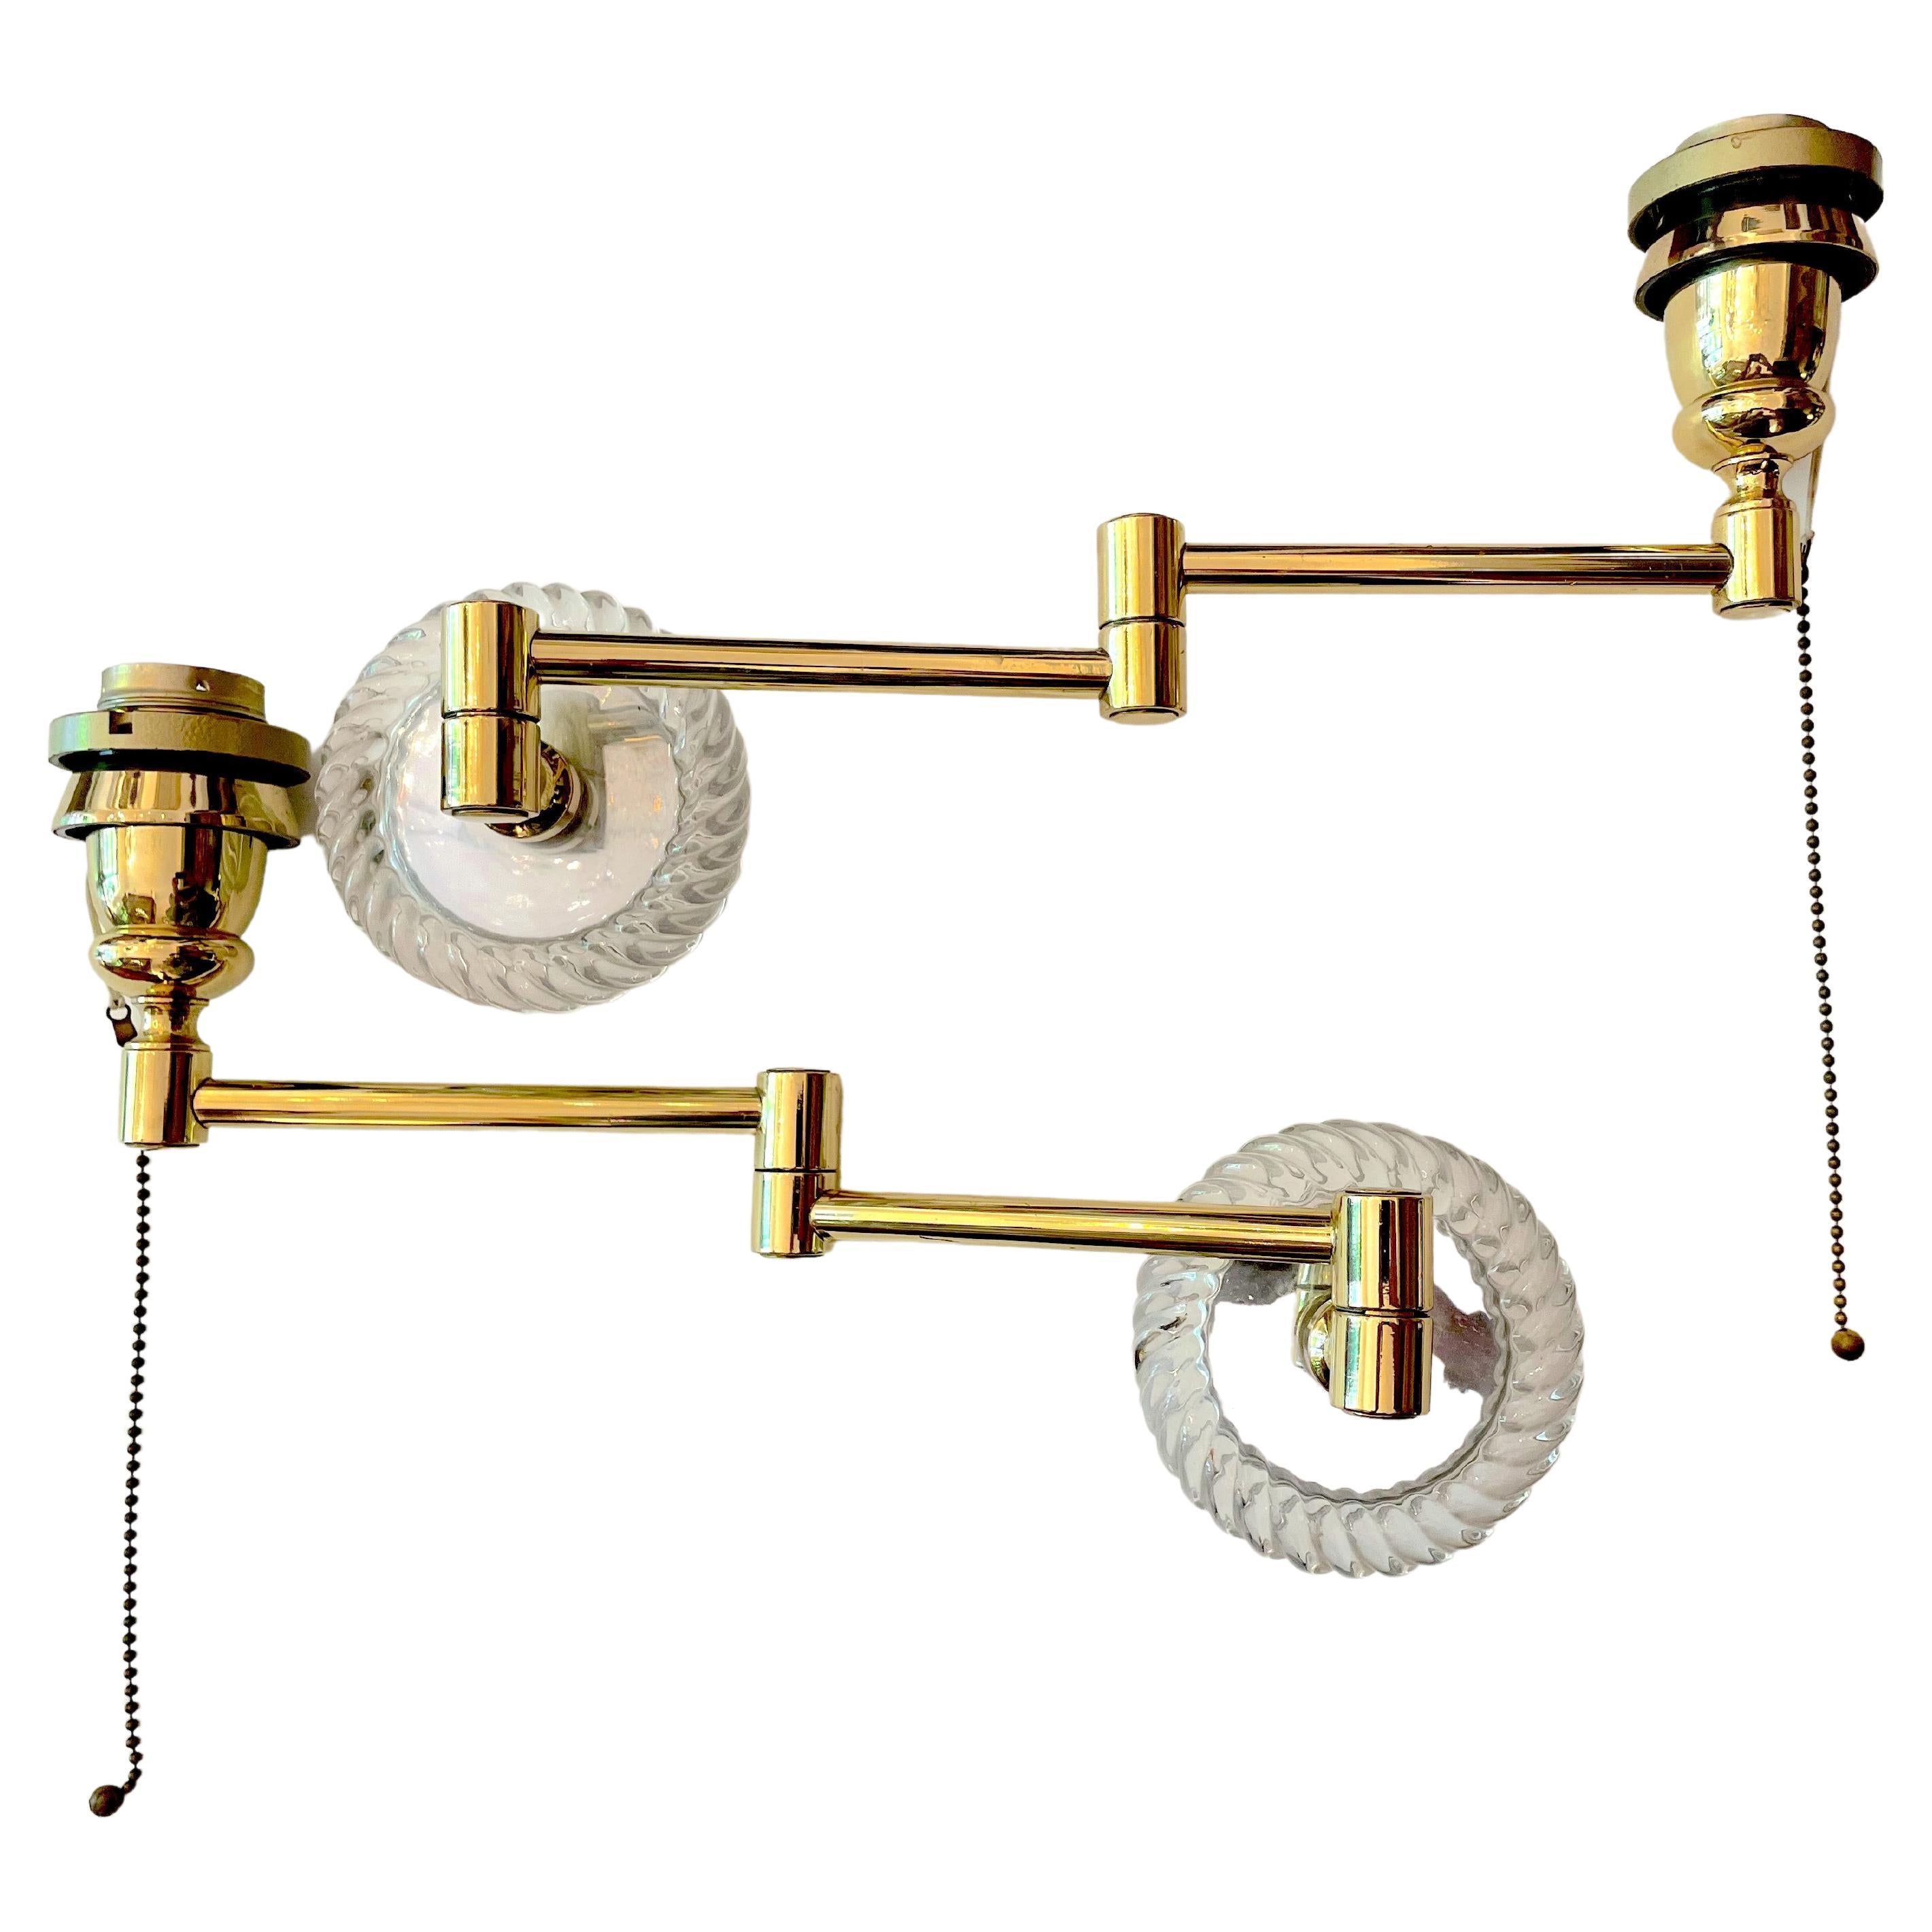 From Italy a Florentine pair of sconces, two brass and crystal flexible, extensible arm wall lights manufactured by Banci Firenze.
These original Italian brass wall-lights are realized with an extensible arm starting with a circular steel wall